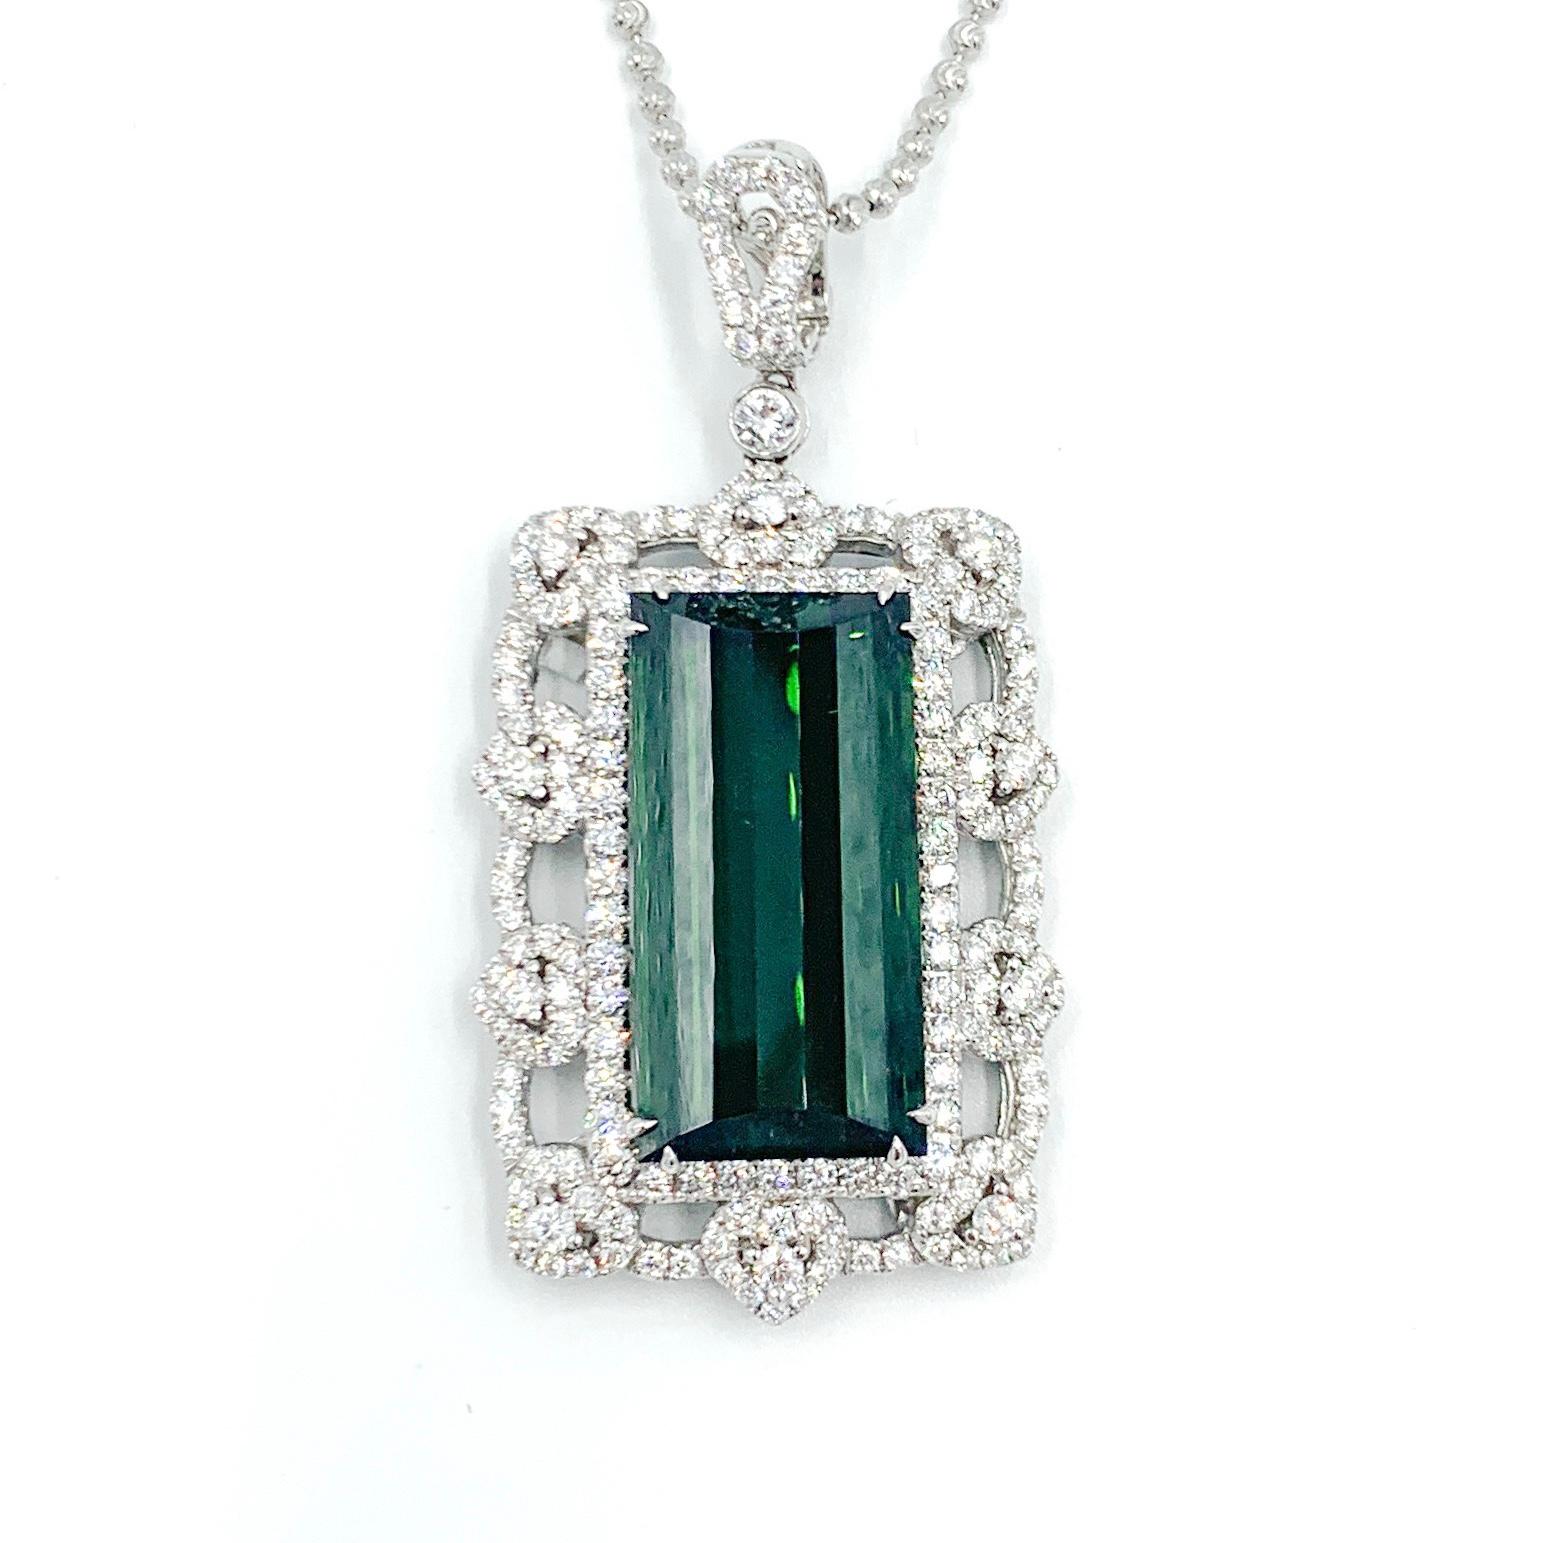 When it comes to dark green tourmaline, sometimes referred to as verdelite, this pendant exemplifies perfection. This natural stone features a pure green hue, very dark tone, and excellent saturation. The 4.25 carats of F/G color, SI clarity